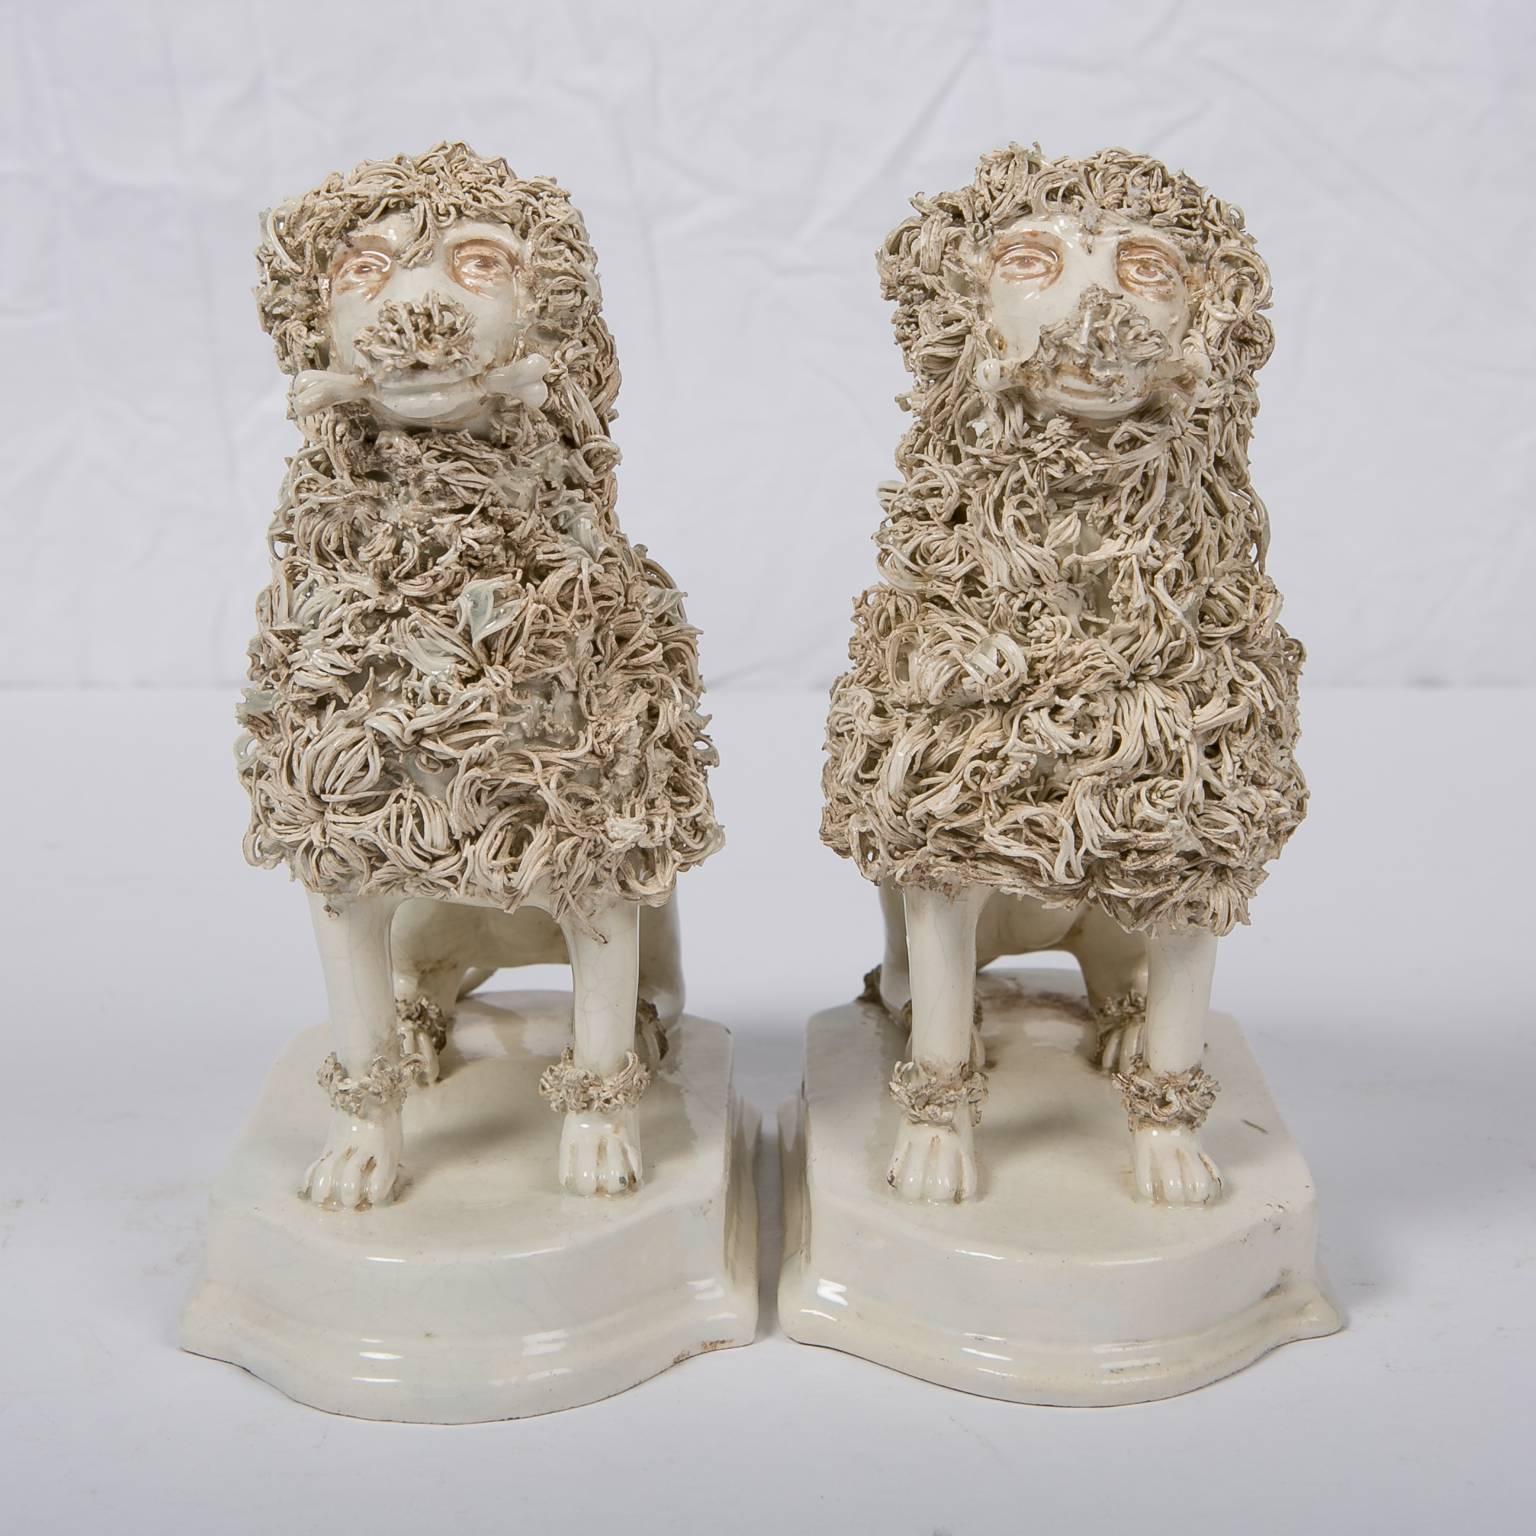 We are pleased to offer this pair of wonderful Antique Creamware Dogs Made by Nove di Bassano. These creamware poodles were made in Italy in the first quarter of the 19th century. Each is modelled seated, on a stepped base. The technique for making